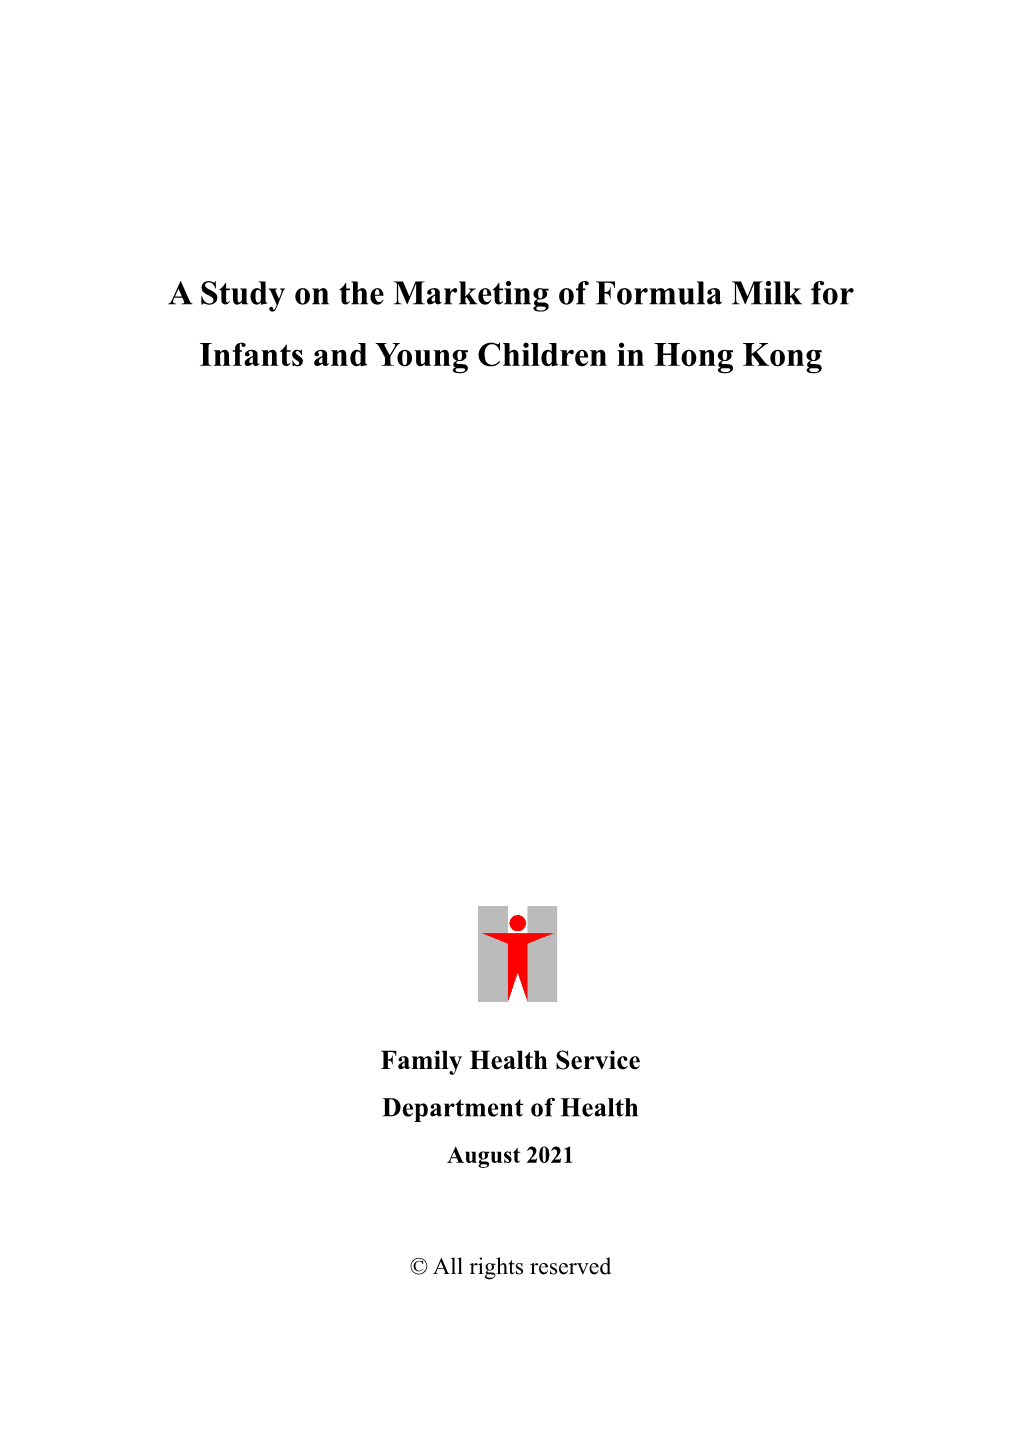 J9019 Study on the Marketing of Formula Milk for Infants and Young